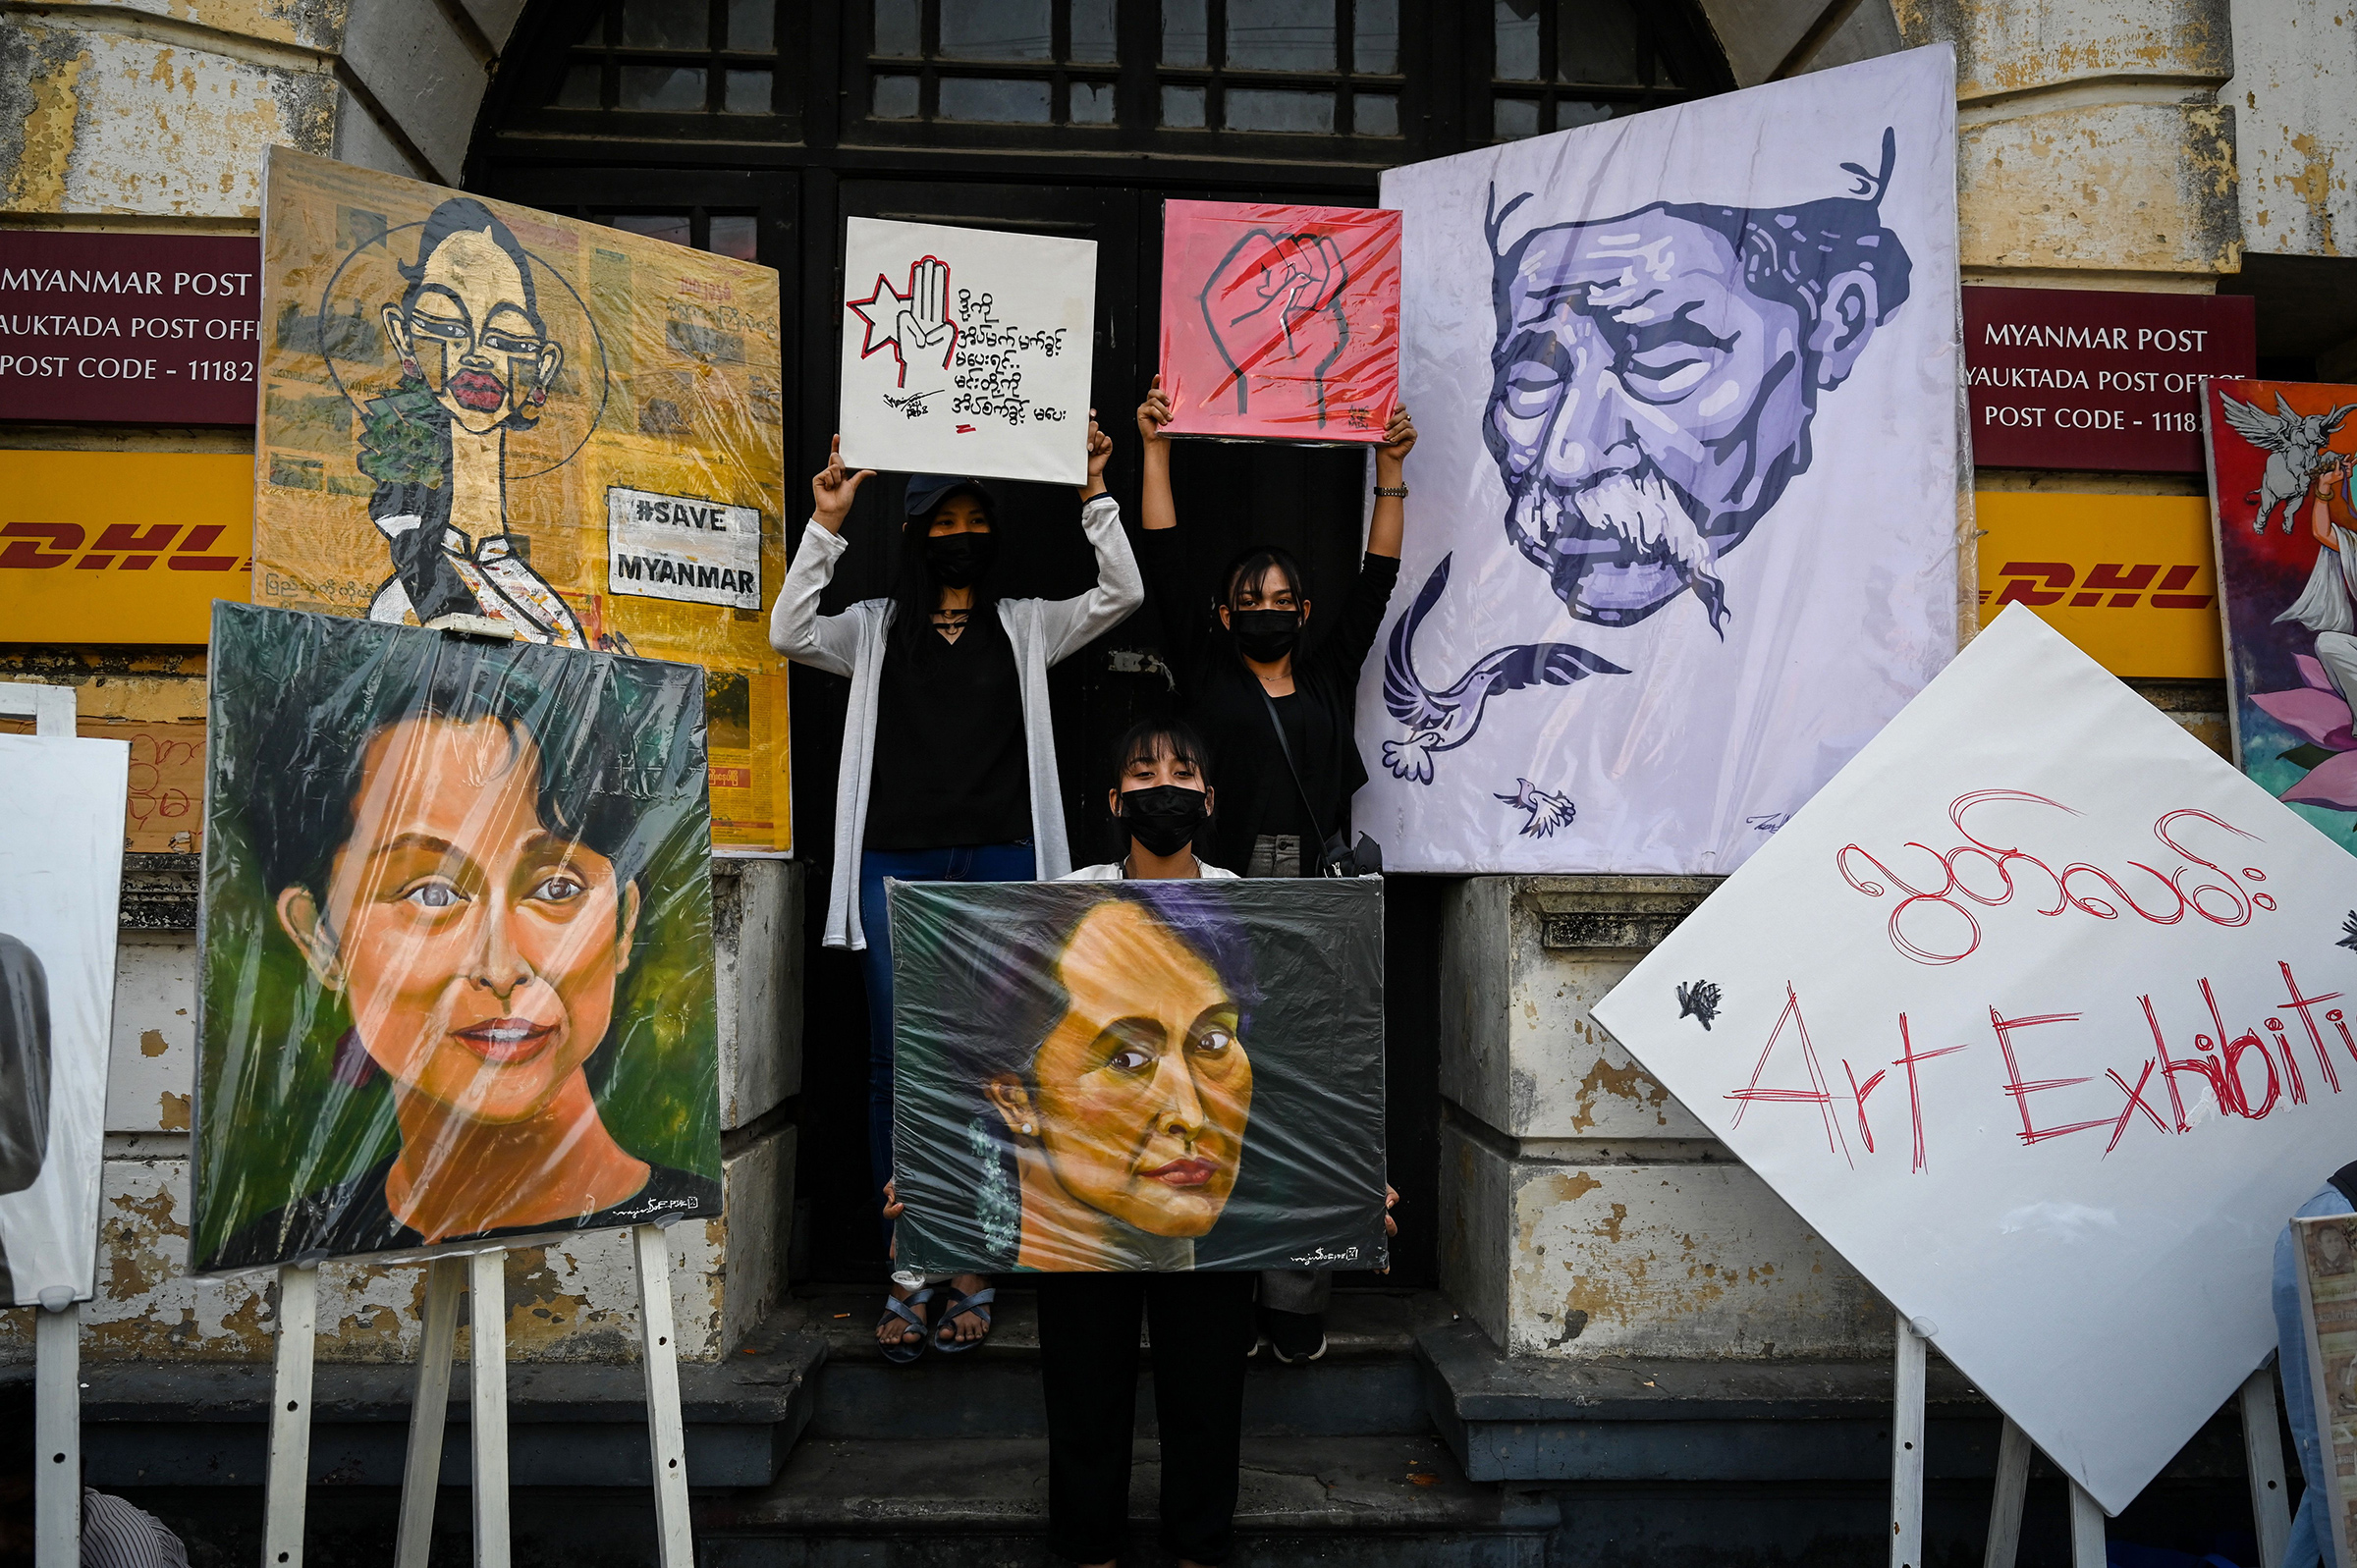 Protesters stand next to portraits of Aung San Suu Kyi and other artwork during a demonstration against the military coup in Yangon on Feb. 9 (Ye Aung Thu—AFP/Getty Images)